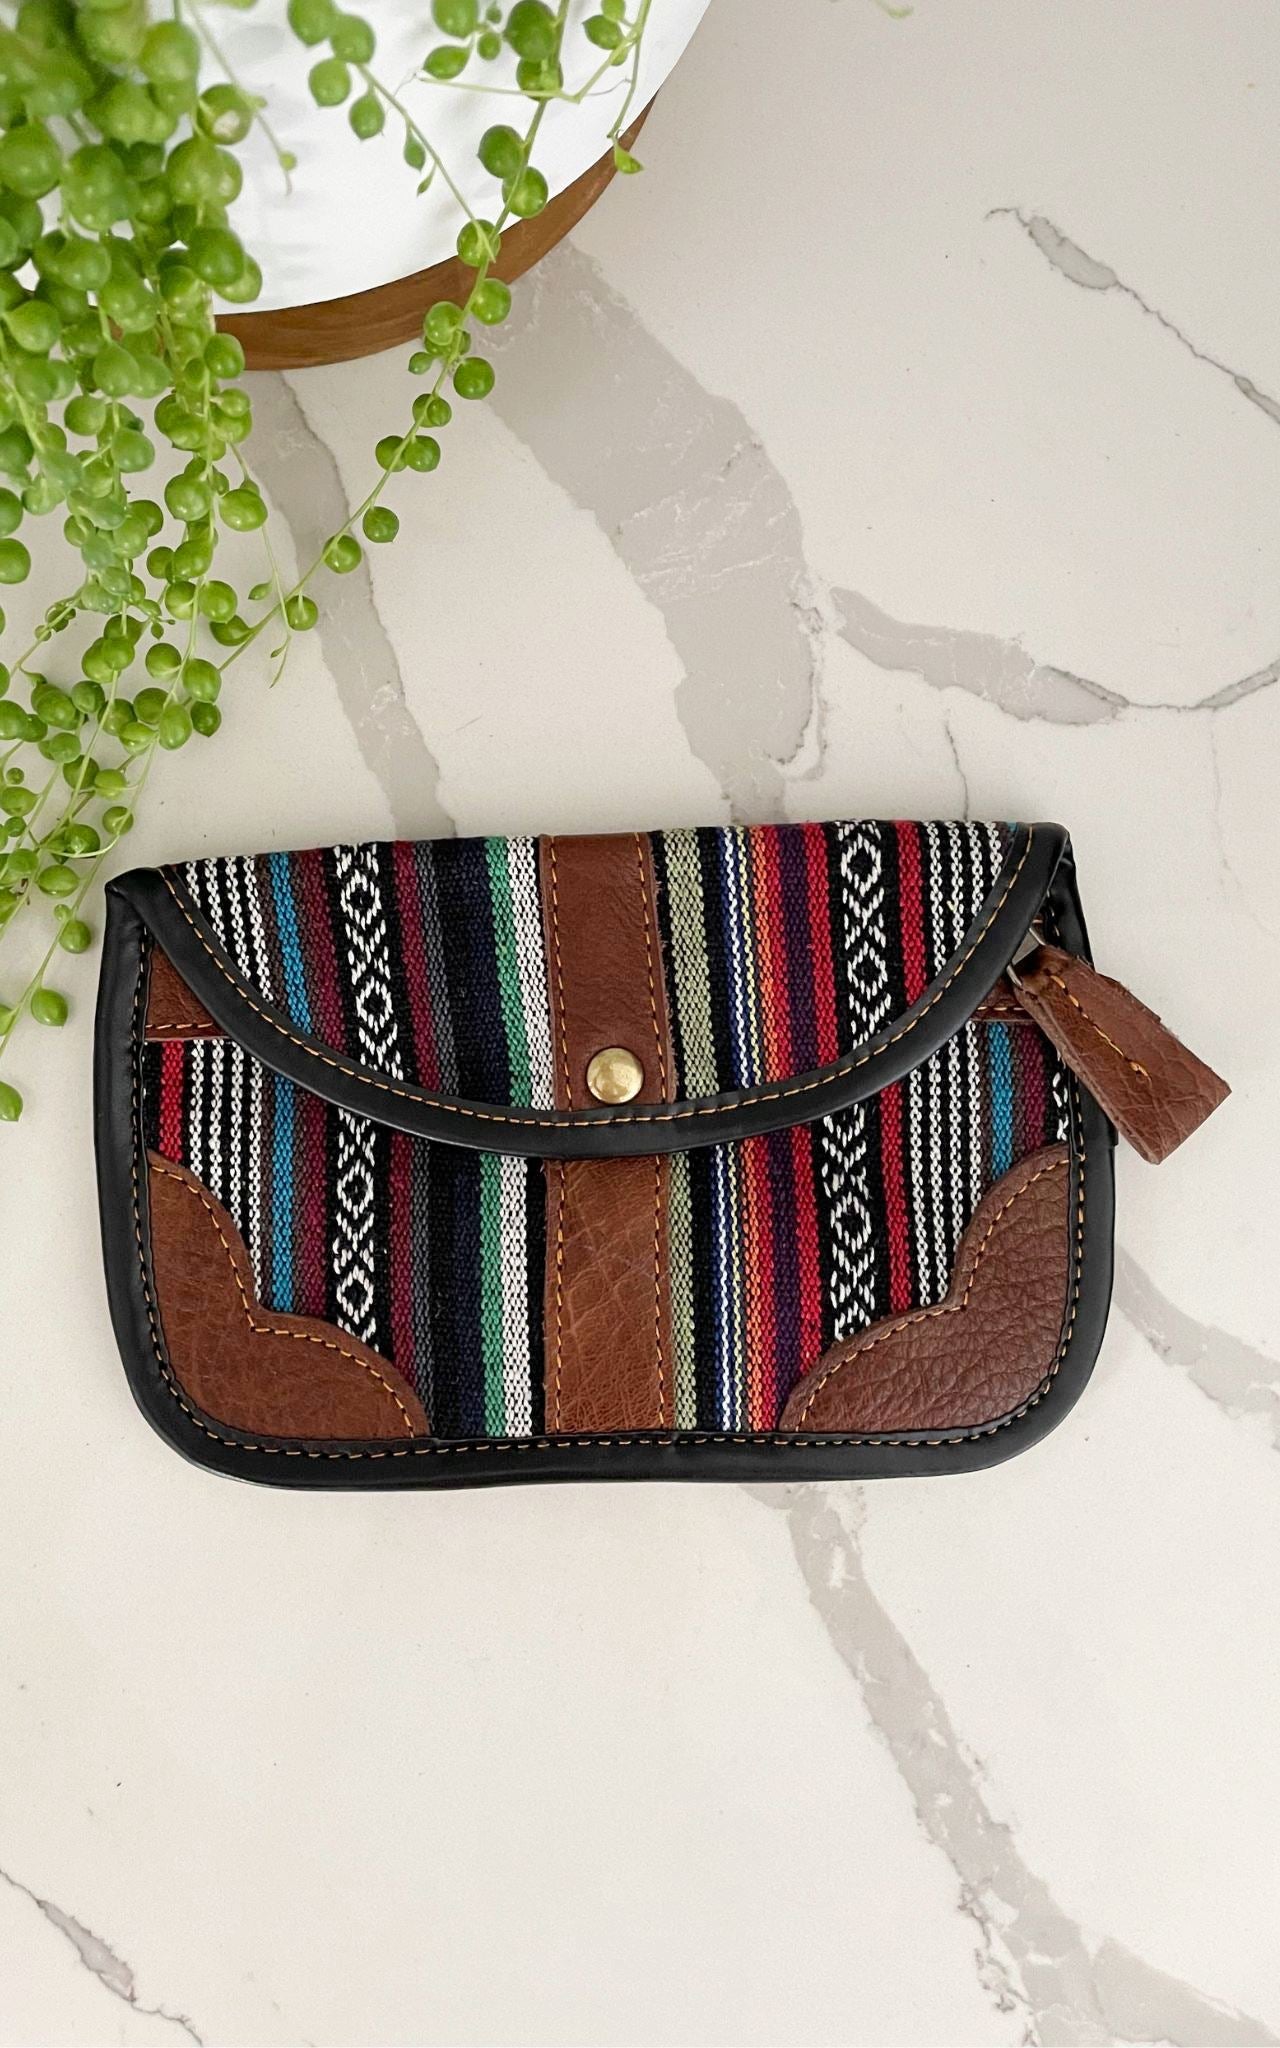 Surya Australia Ethical Buffalo Leather + Woven Cotton Clutch Wallets from Nepal - Sejun